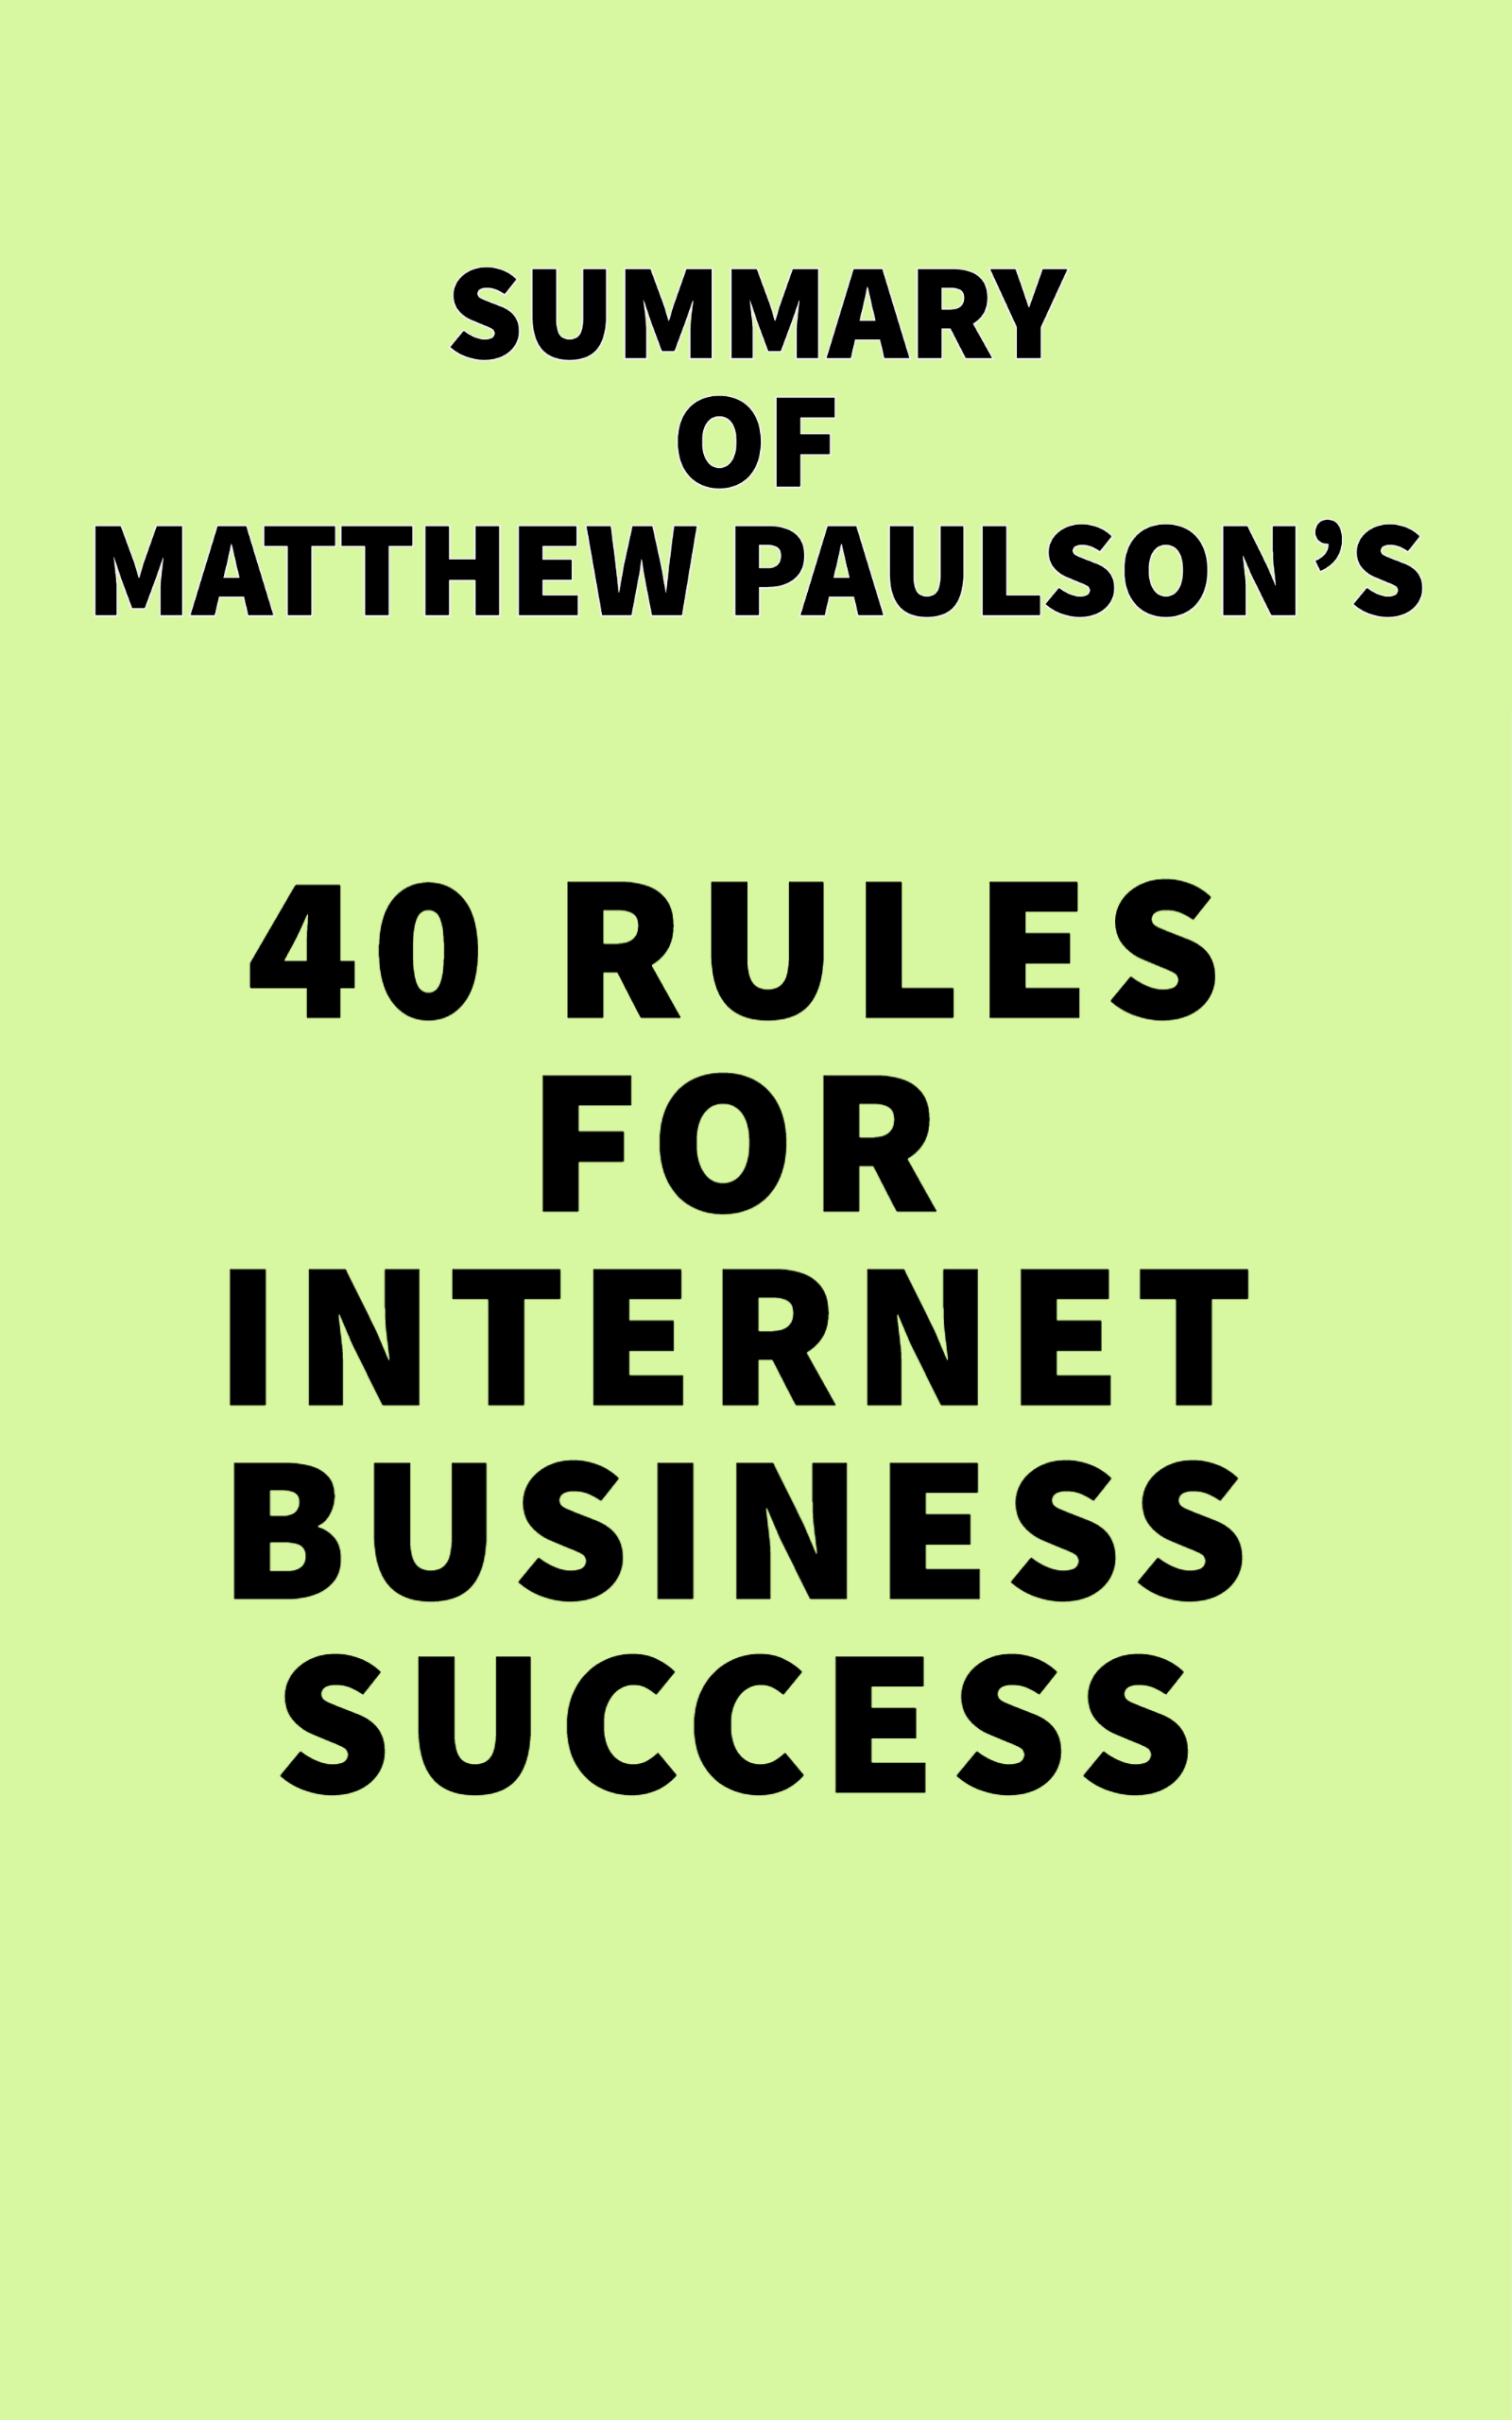 Summary of Matthew Paulson's 40 Rules for Internet Business Success